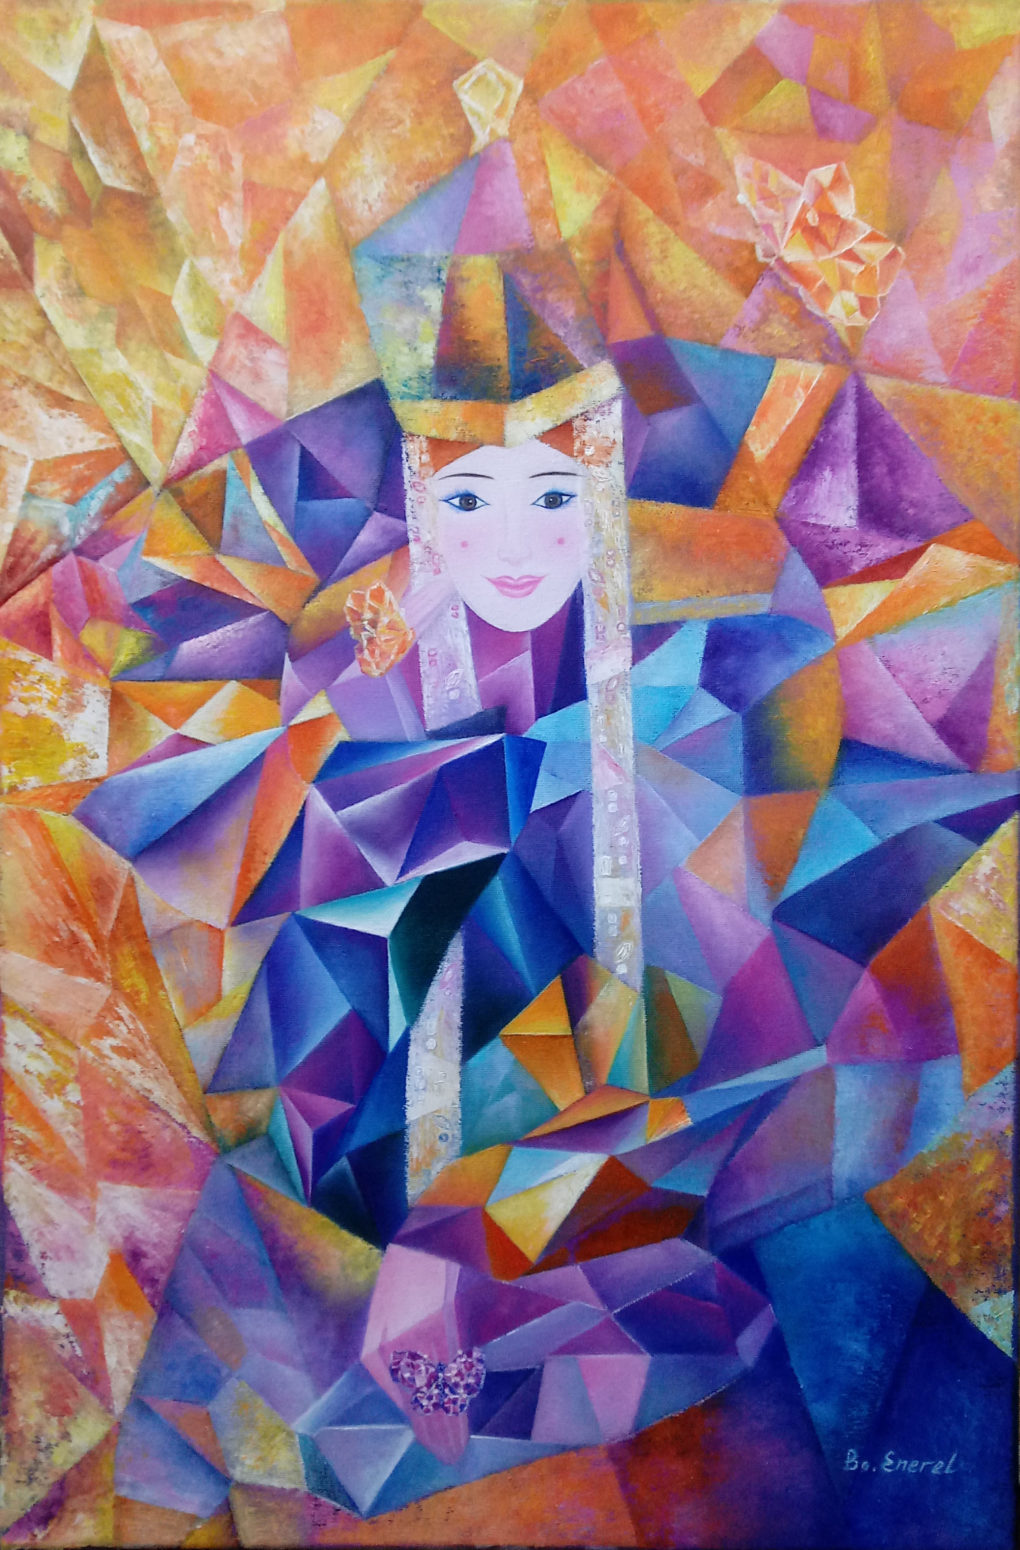 © 2017. QUEEN by Mongolian artist B.Enerel. Reproduced on CPinMongolia.com with the artist's permission.